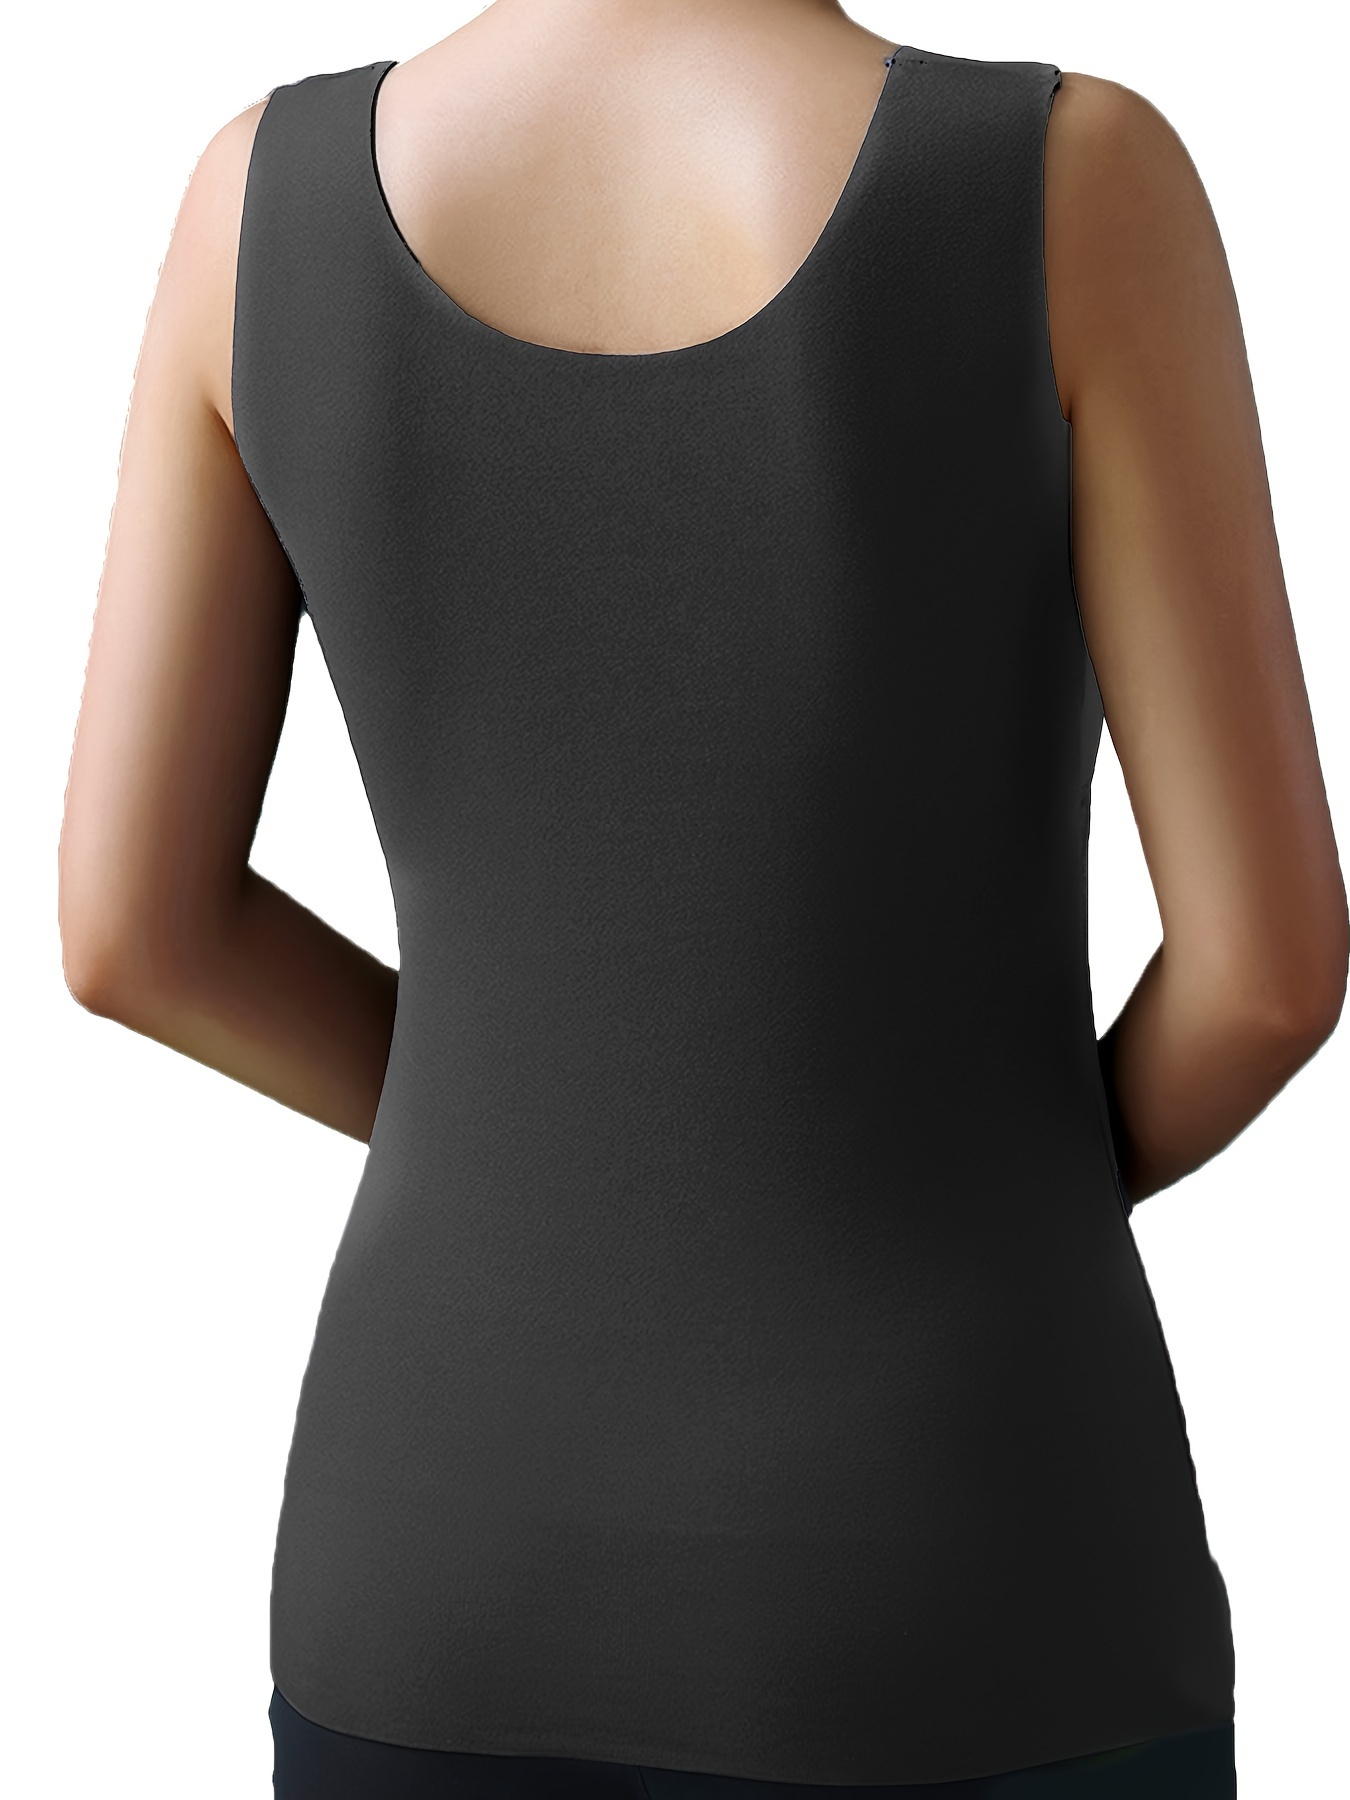 Best Deal for Lace Thermal Underwear Built-in Bra Thermal Tank Top